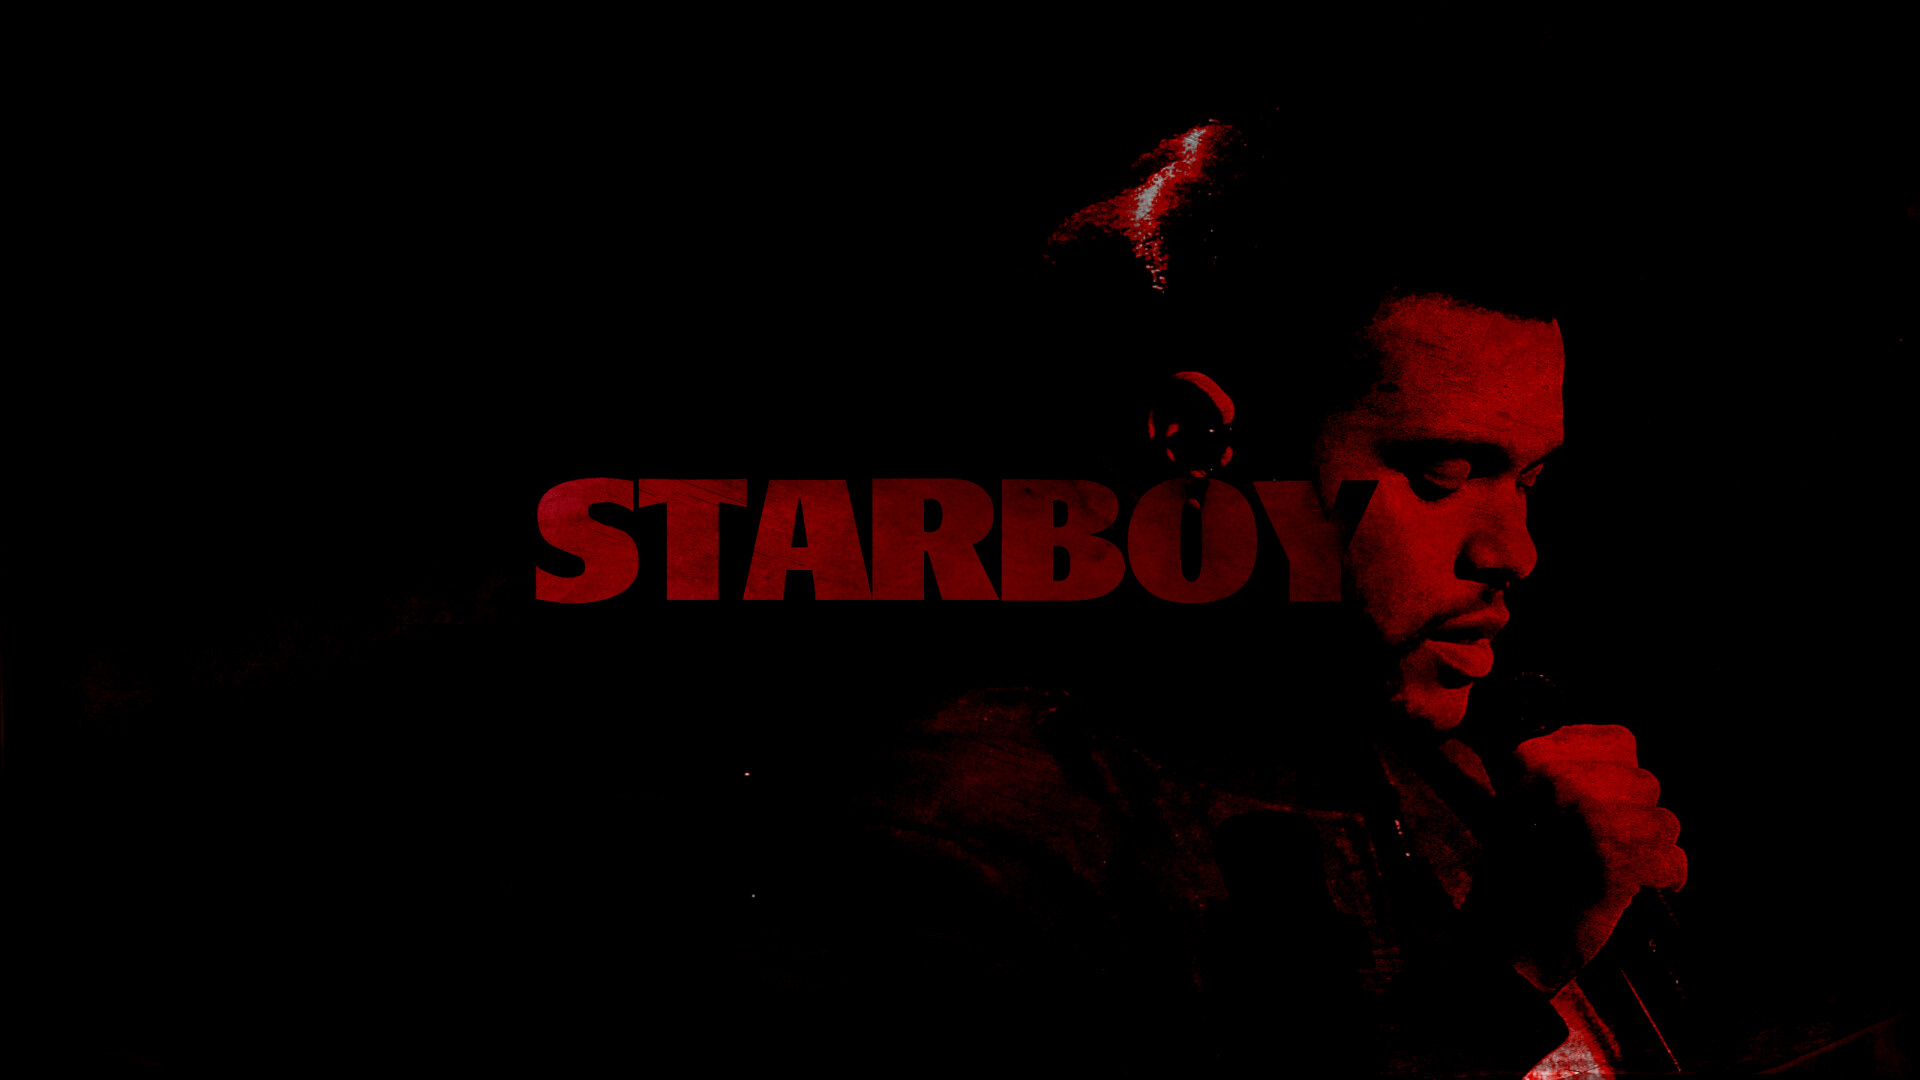 The Weeknd: Starboy, A song from the third studio album, Features French electronic duo Daft Punk. 1920x1080 Full HD Wallpaper.